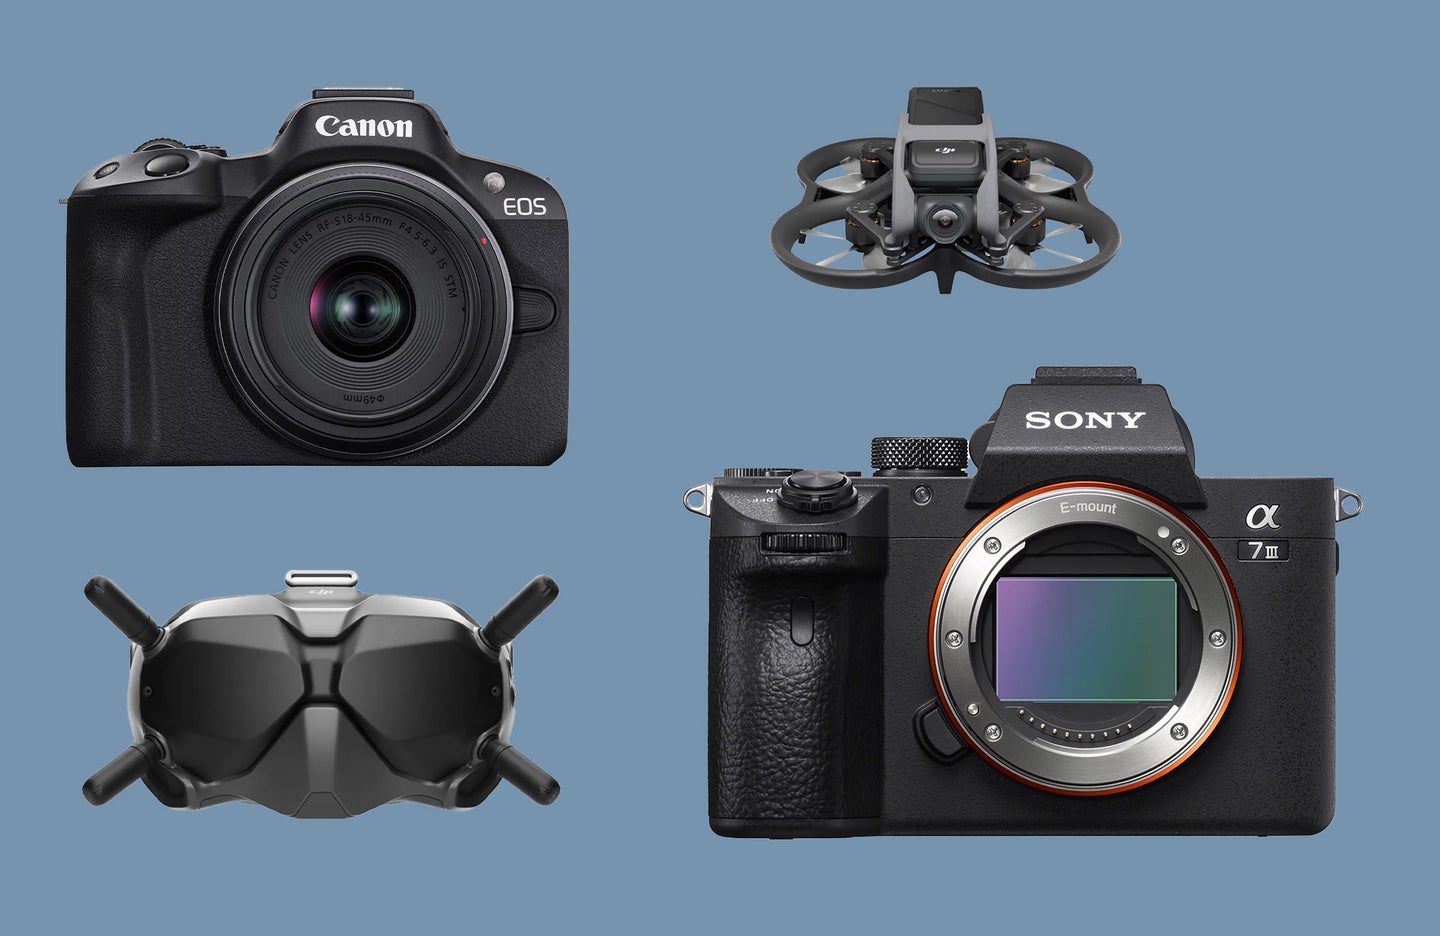 A Canon and Sony camera with DJI drone and FPV headset are placed on a dark blue background.